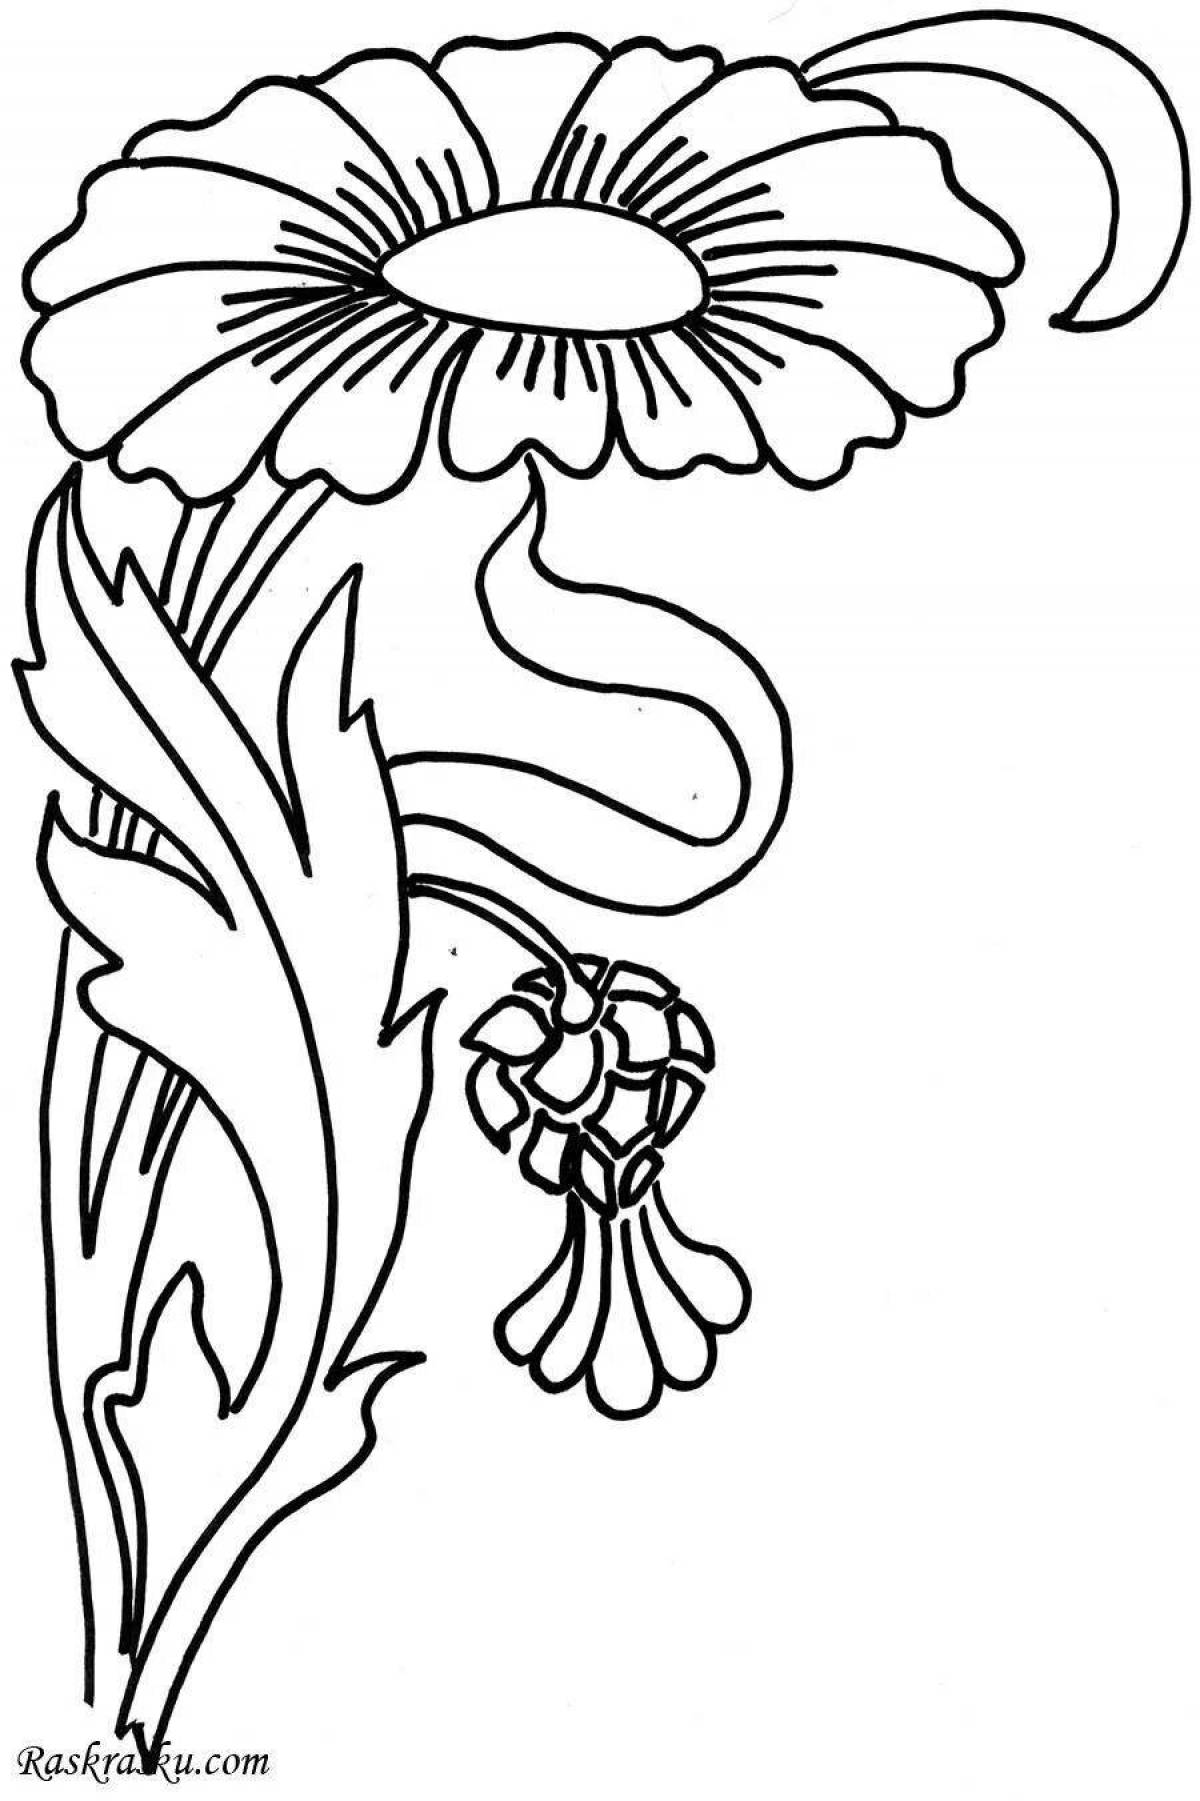 Coloring page of an unknown flower